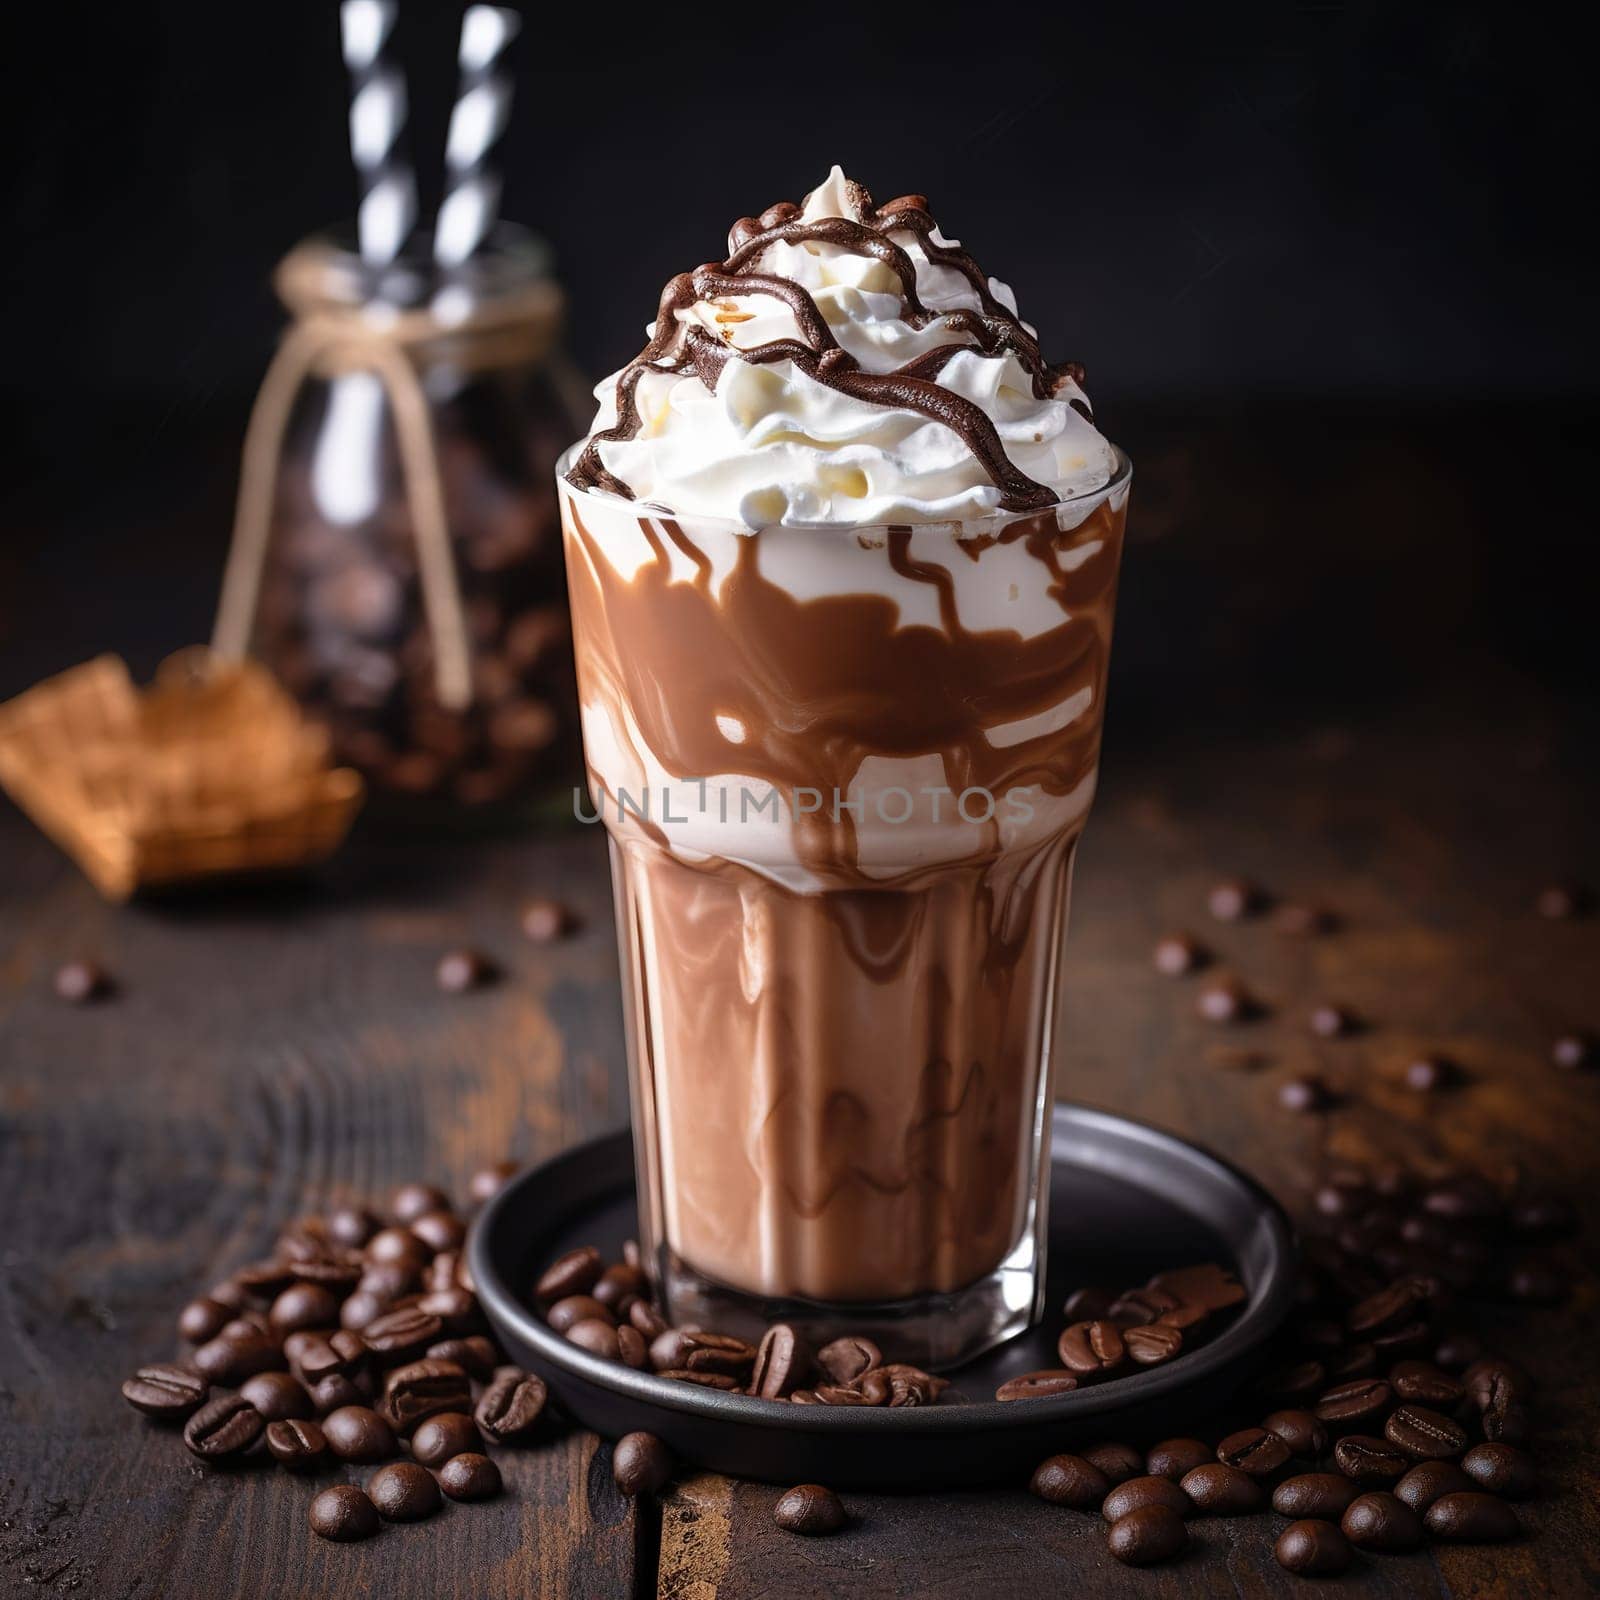 Iced chocolate frappe with whipped cream and coffee beans on the background, food and drink concept by Kadula